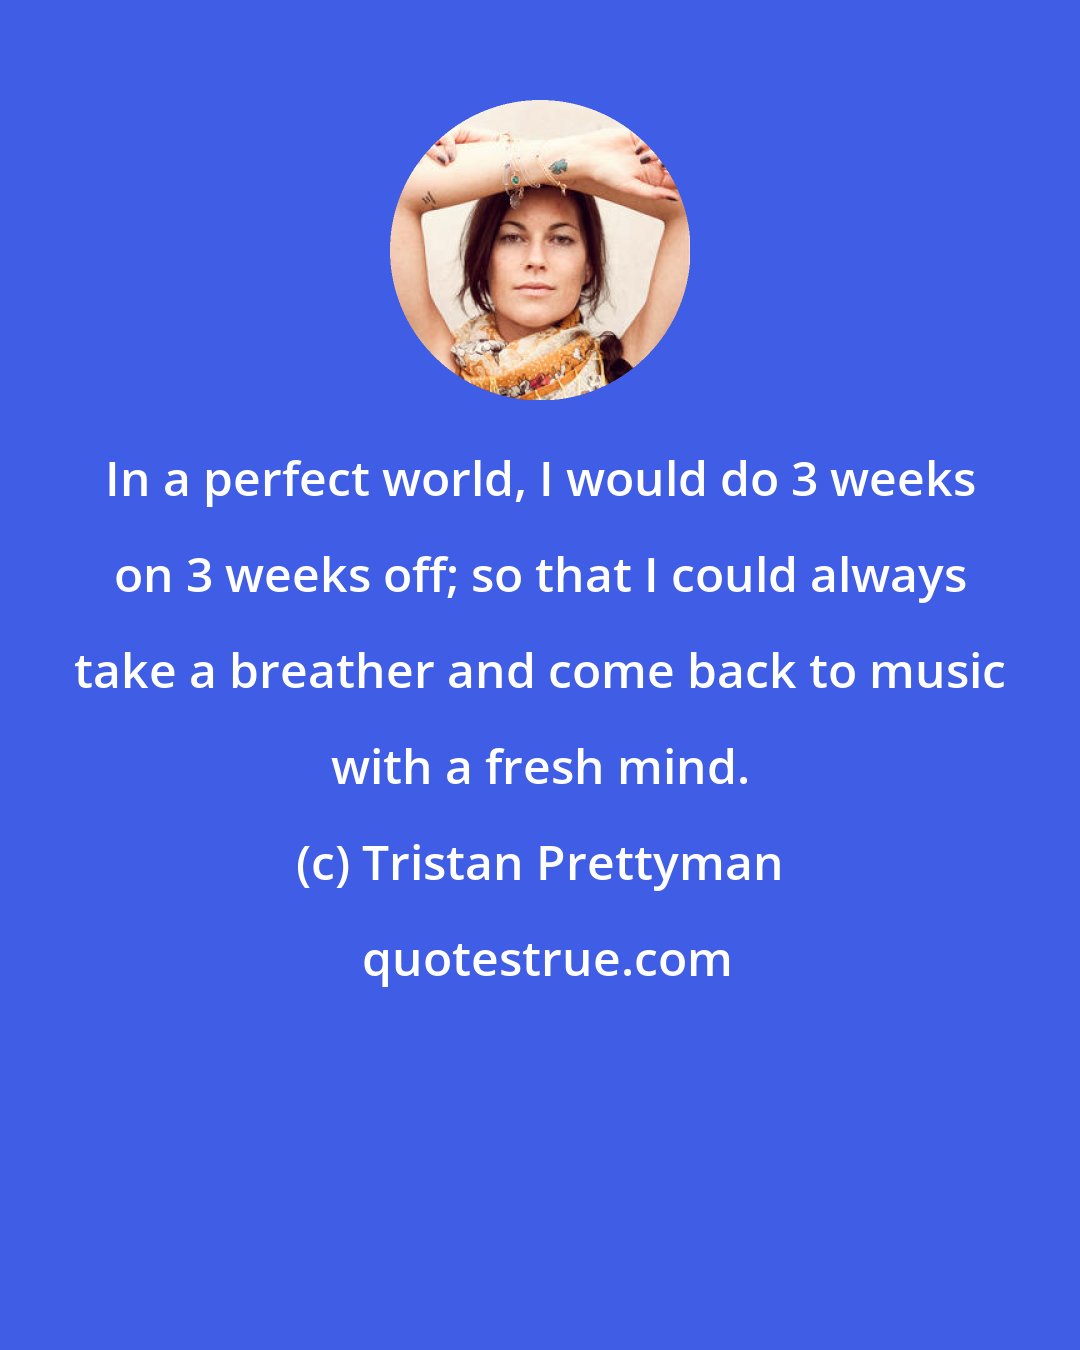 Tristan Prettyman: In a perfect world, I would do 3 weeks on 3 weeks off; so that I could always take a breather and come back to music with a fresh mind.